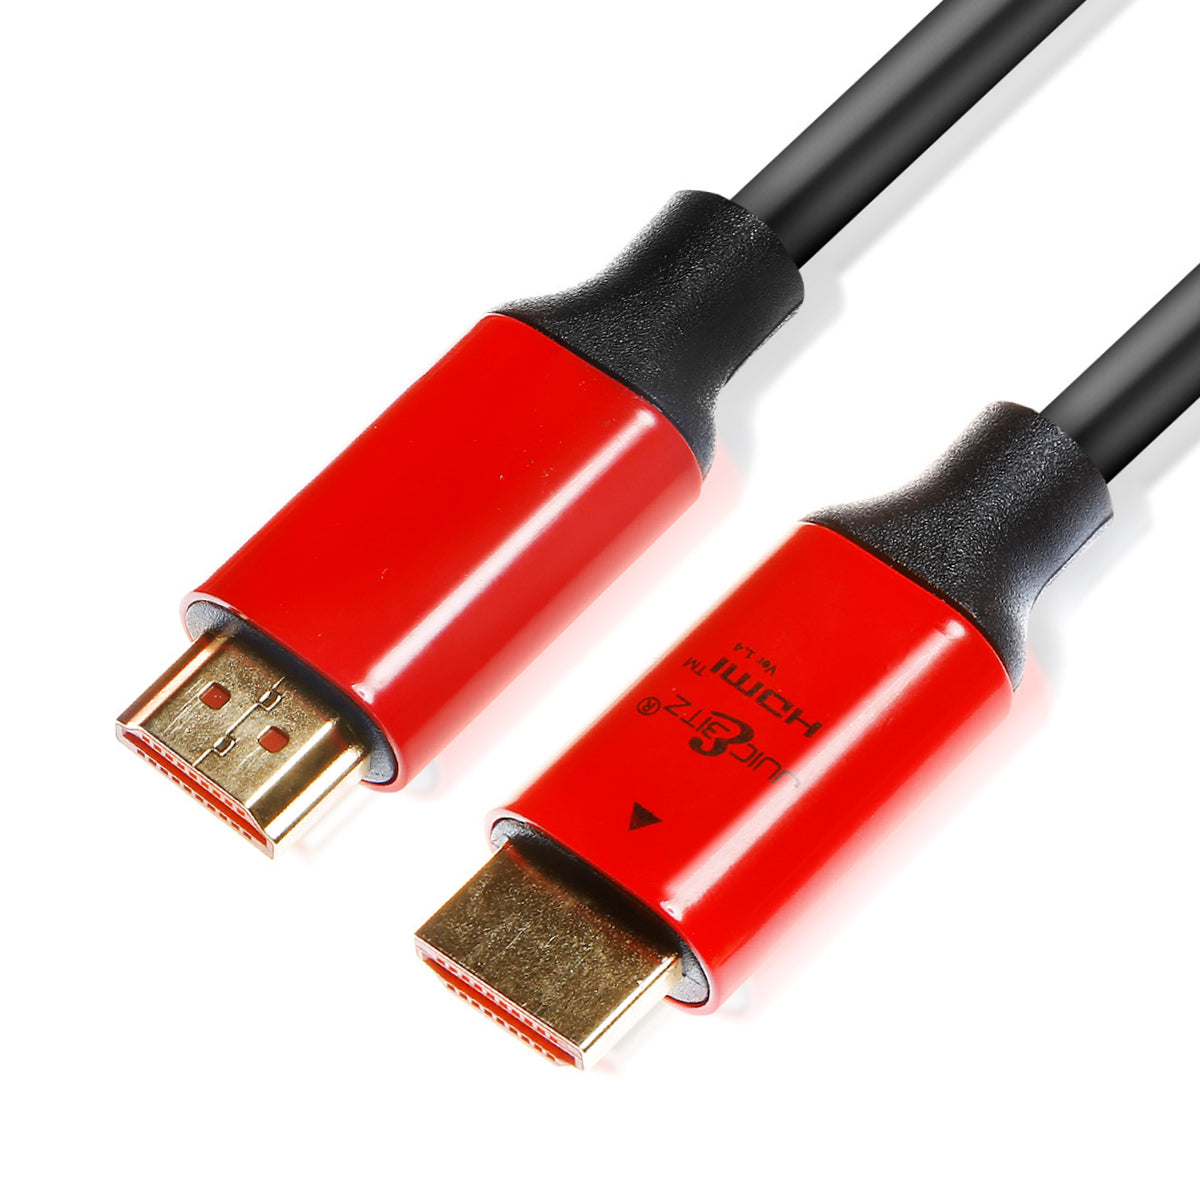 HDMI 1.4 Full HD HDMI Cable with Ethernet, CEC, ARC